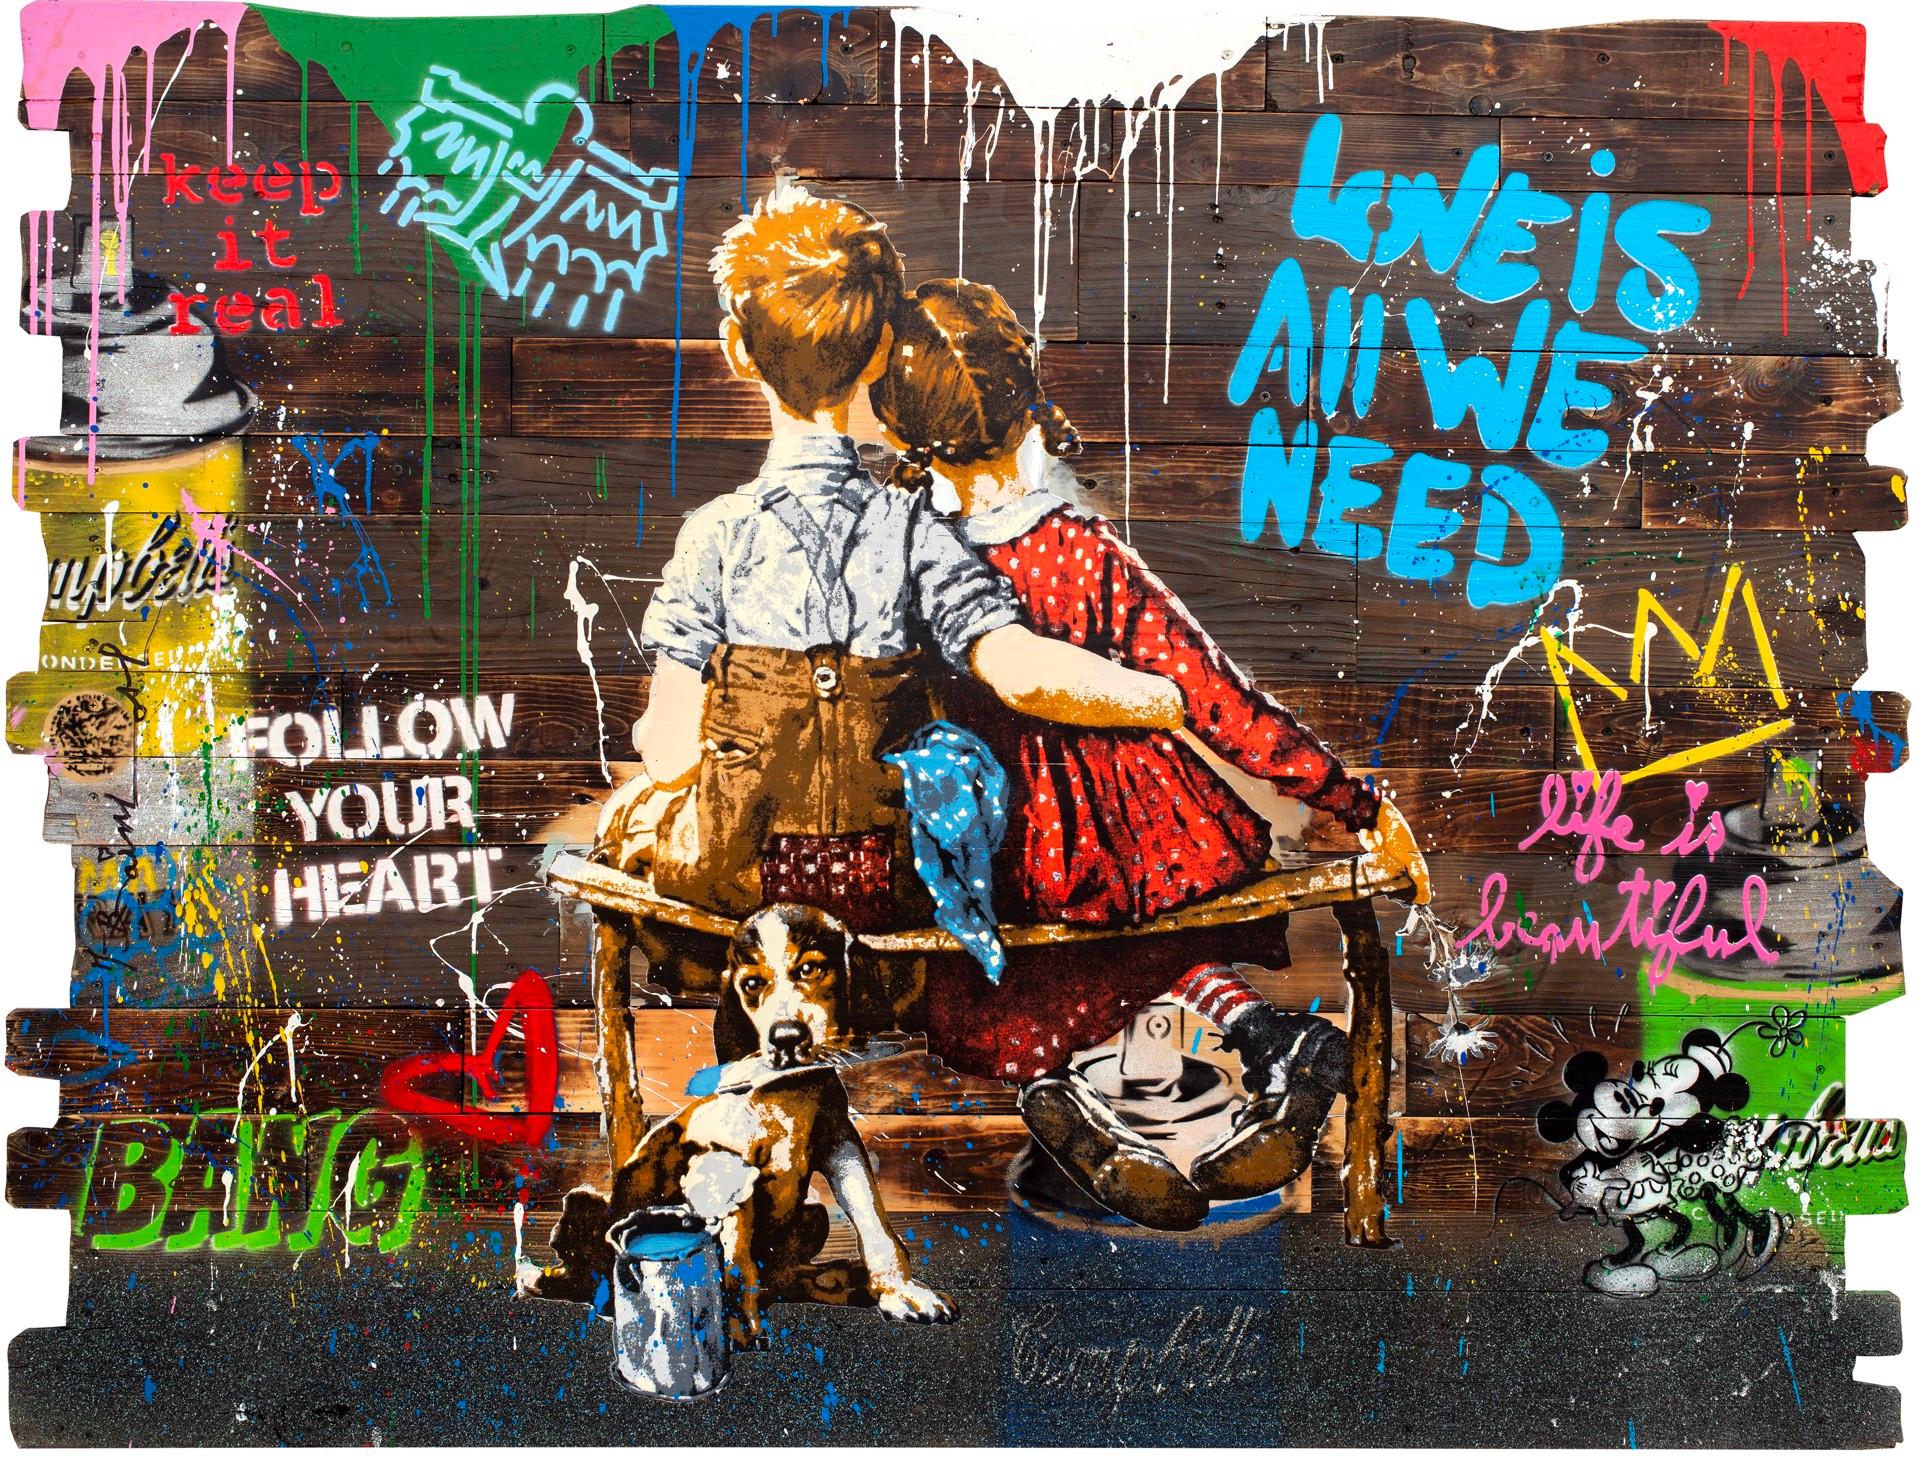 Work Well Together, 2023 - Mixed Media Art by Mr. Brainwash